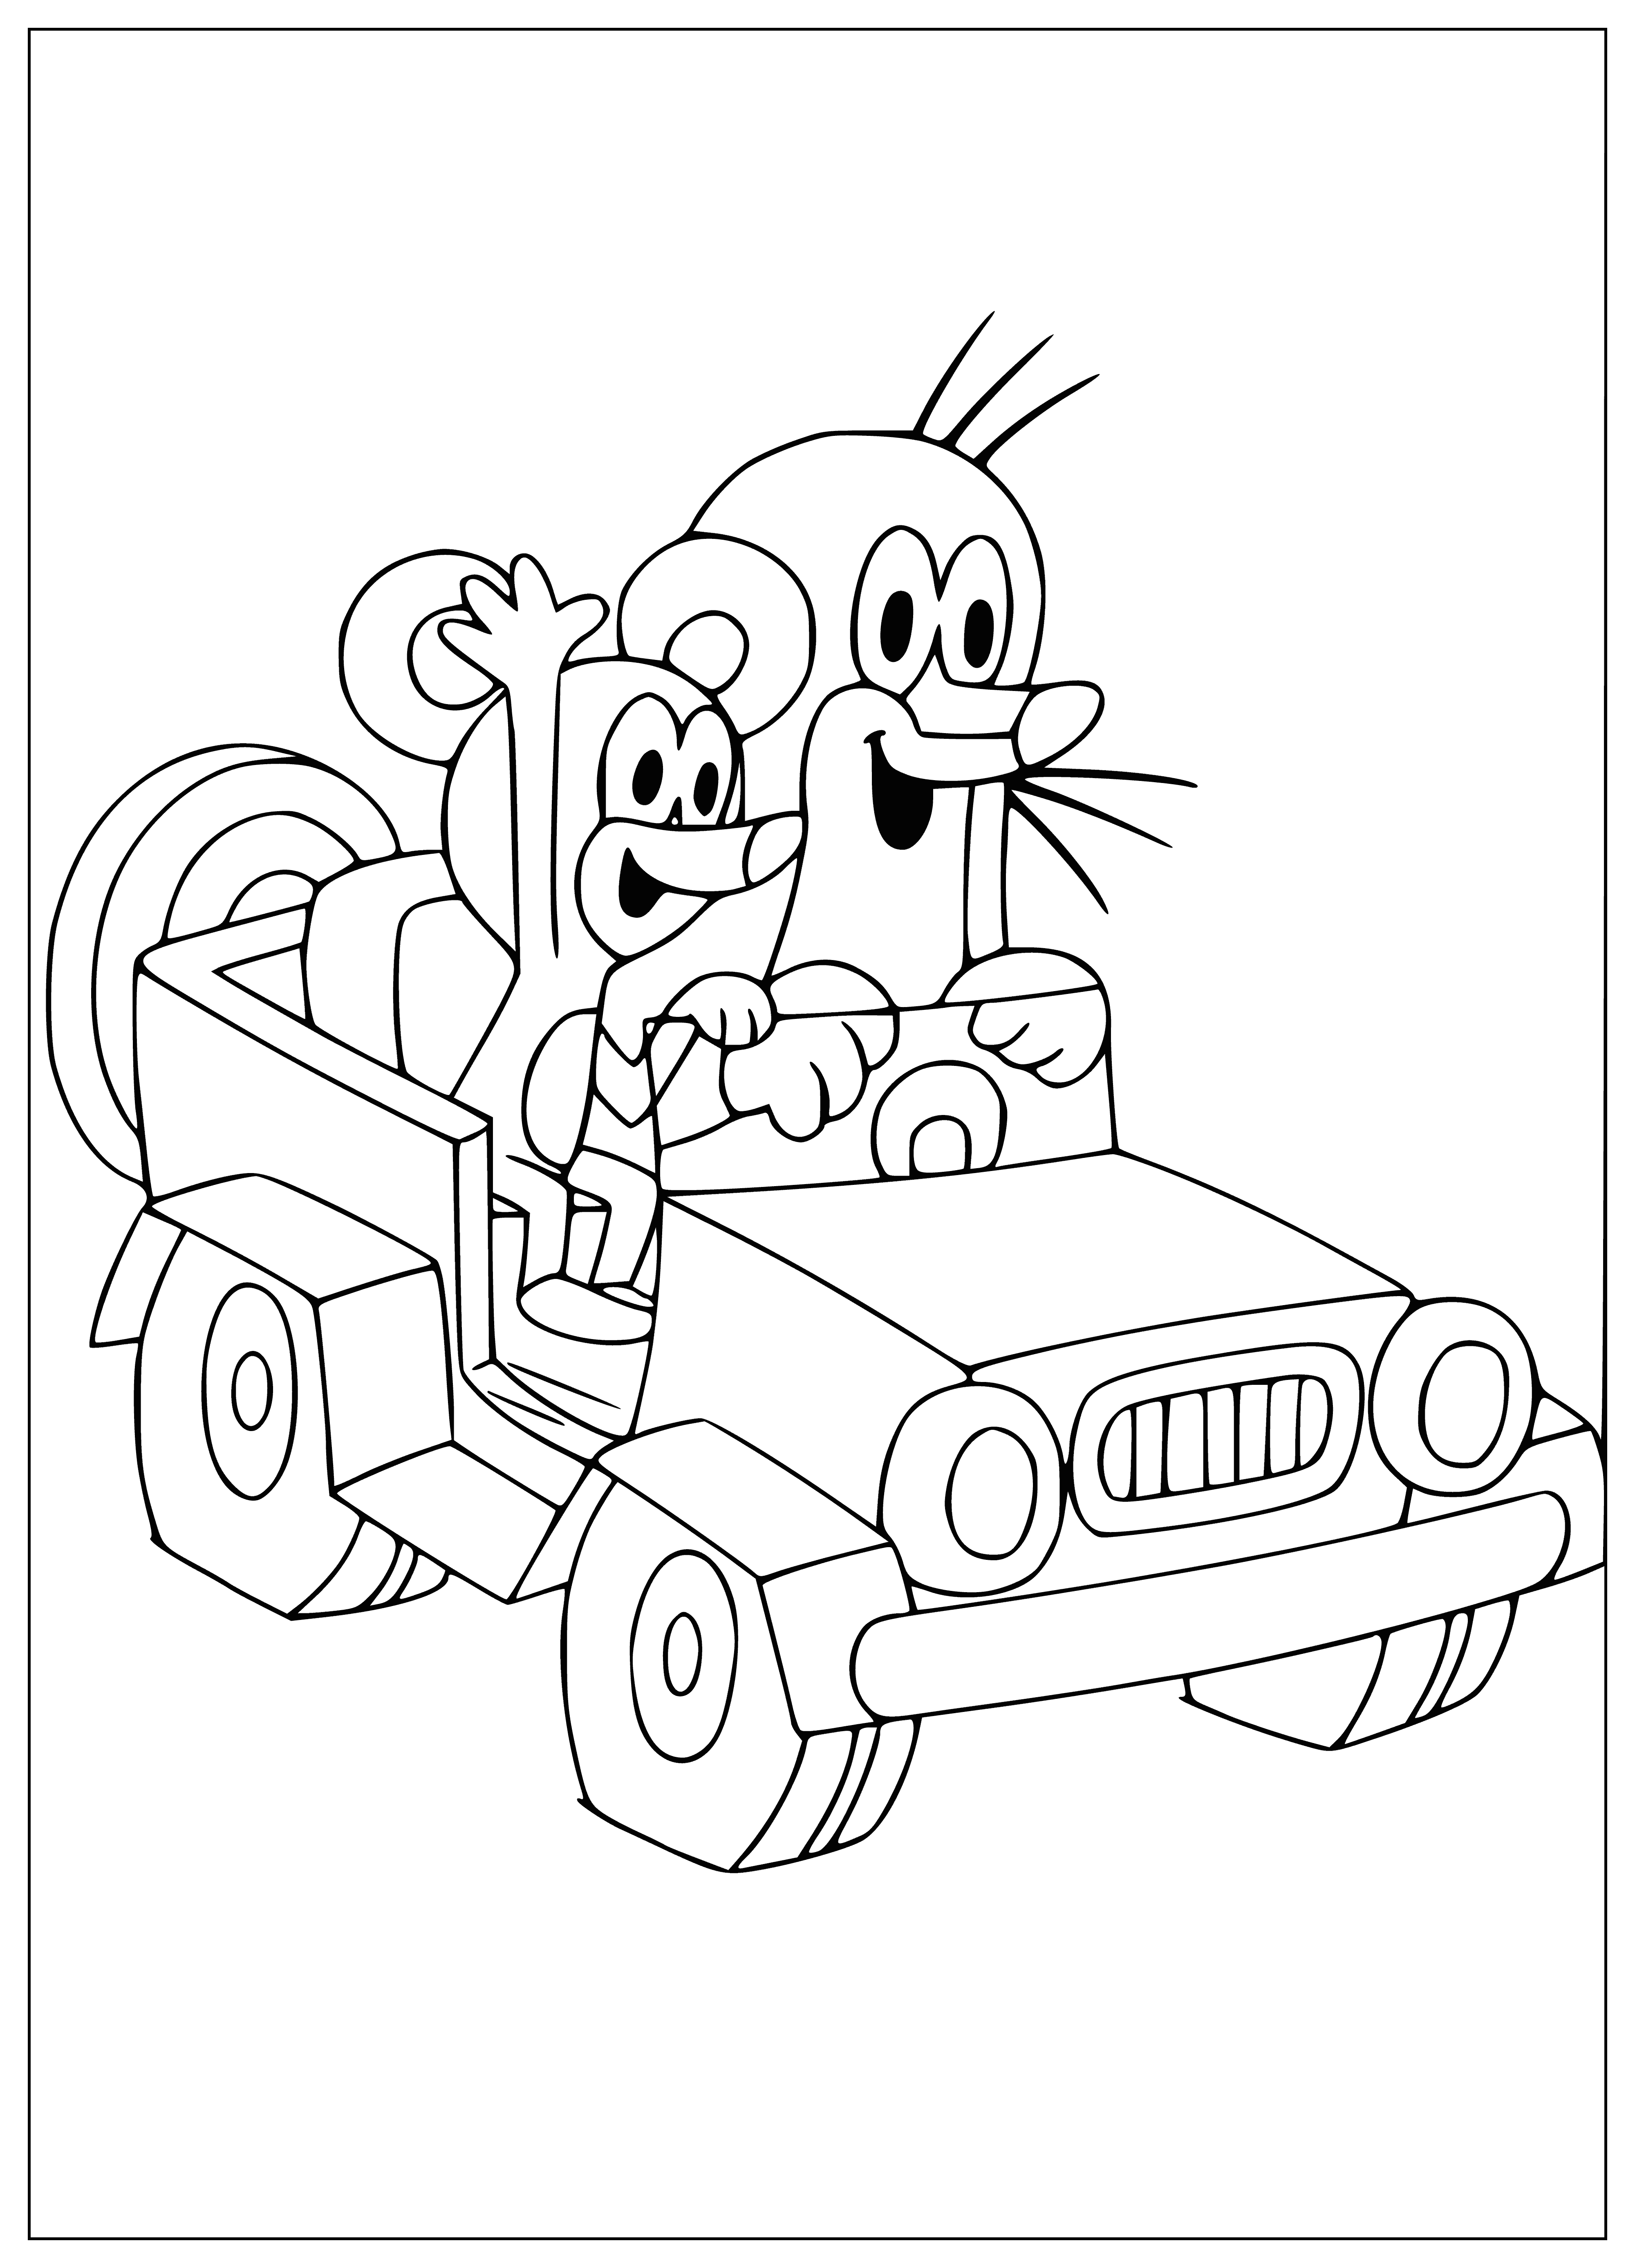 coloring page: Creature drives a red car with yellow stripe, round black headlights and small yellow antenna. Has black nose, eyes and wears a black hat with yellow stripe.